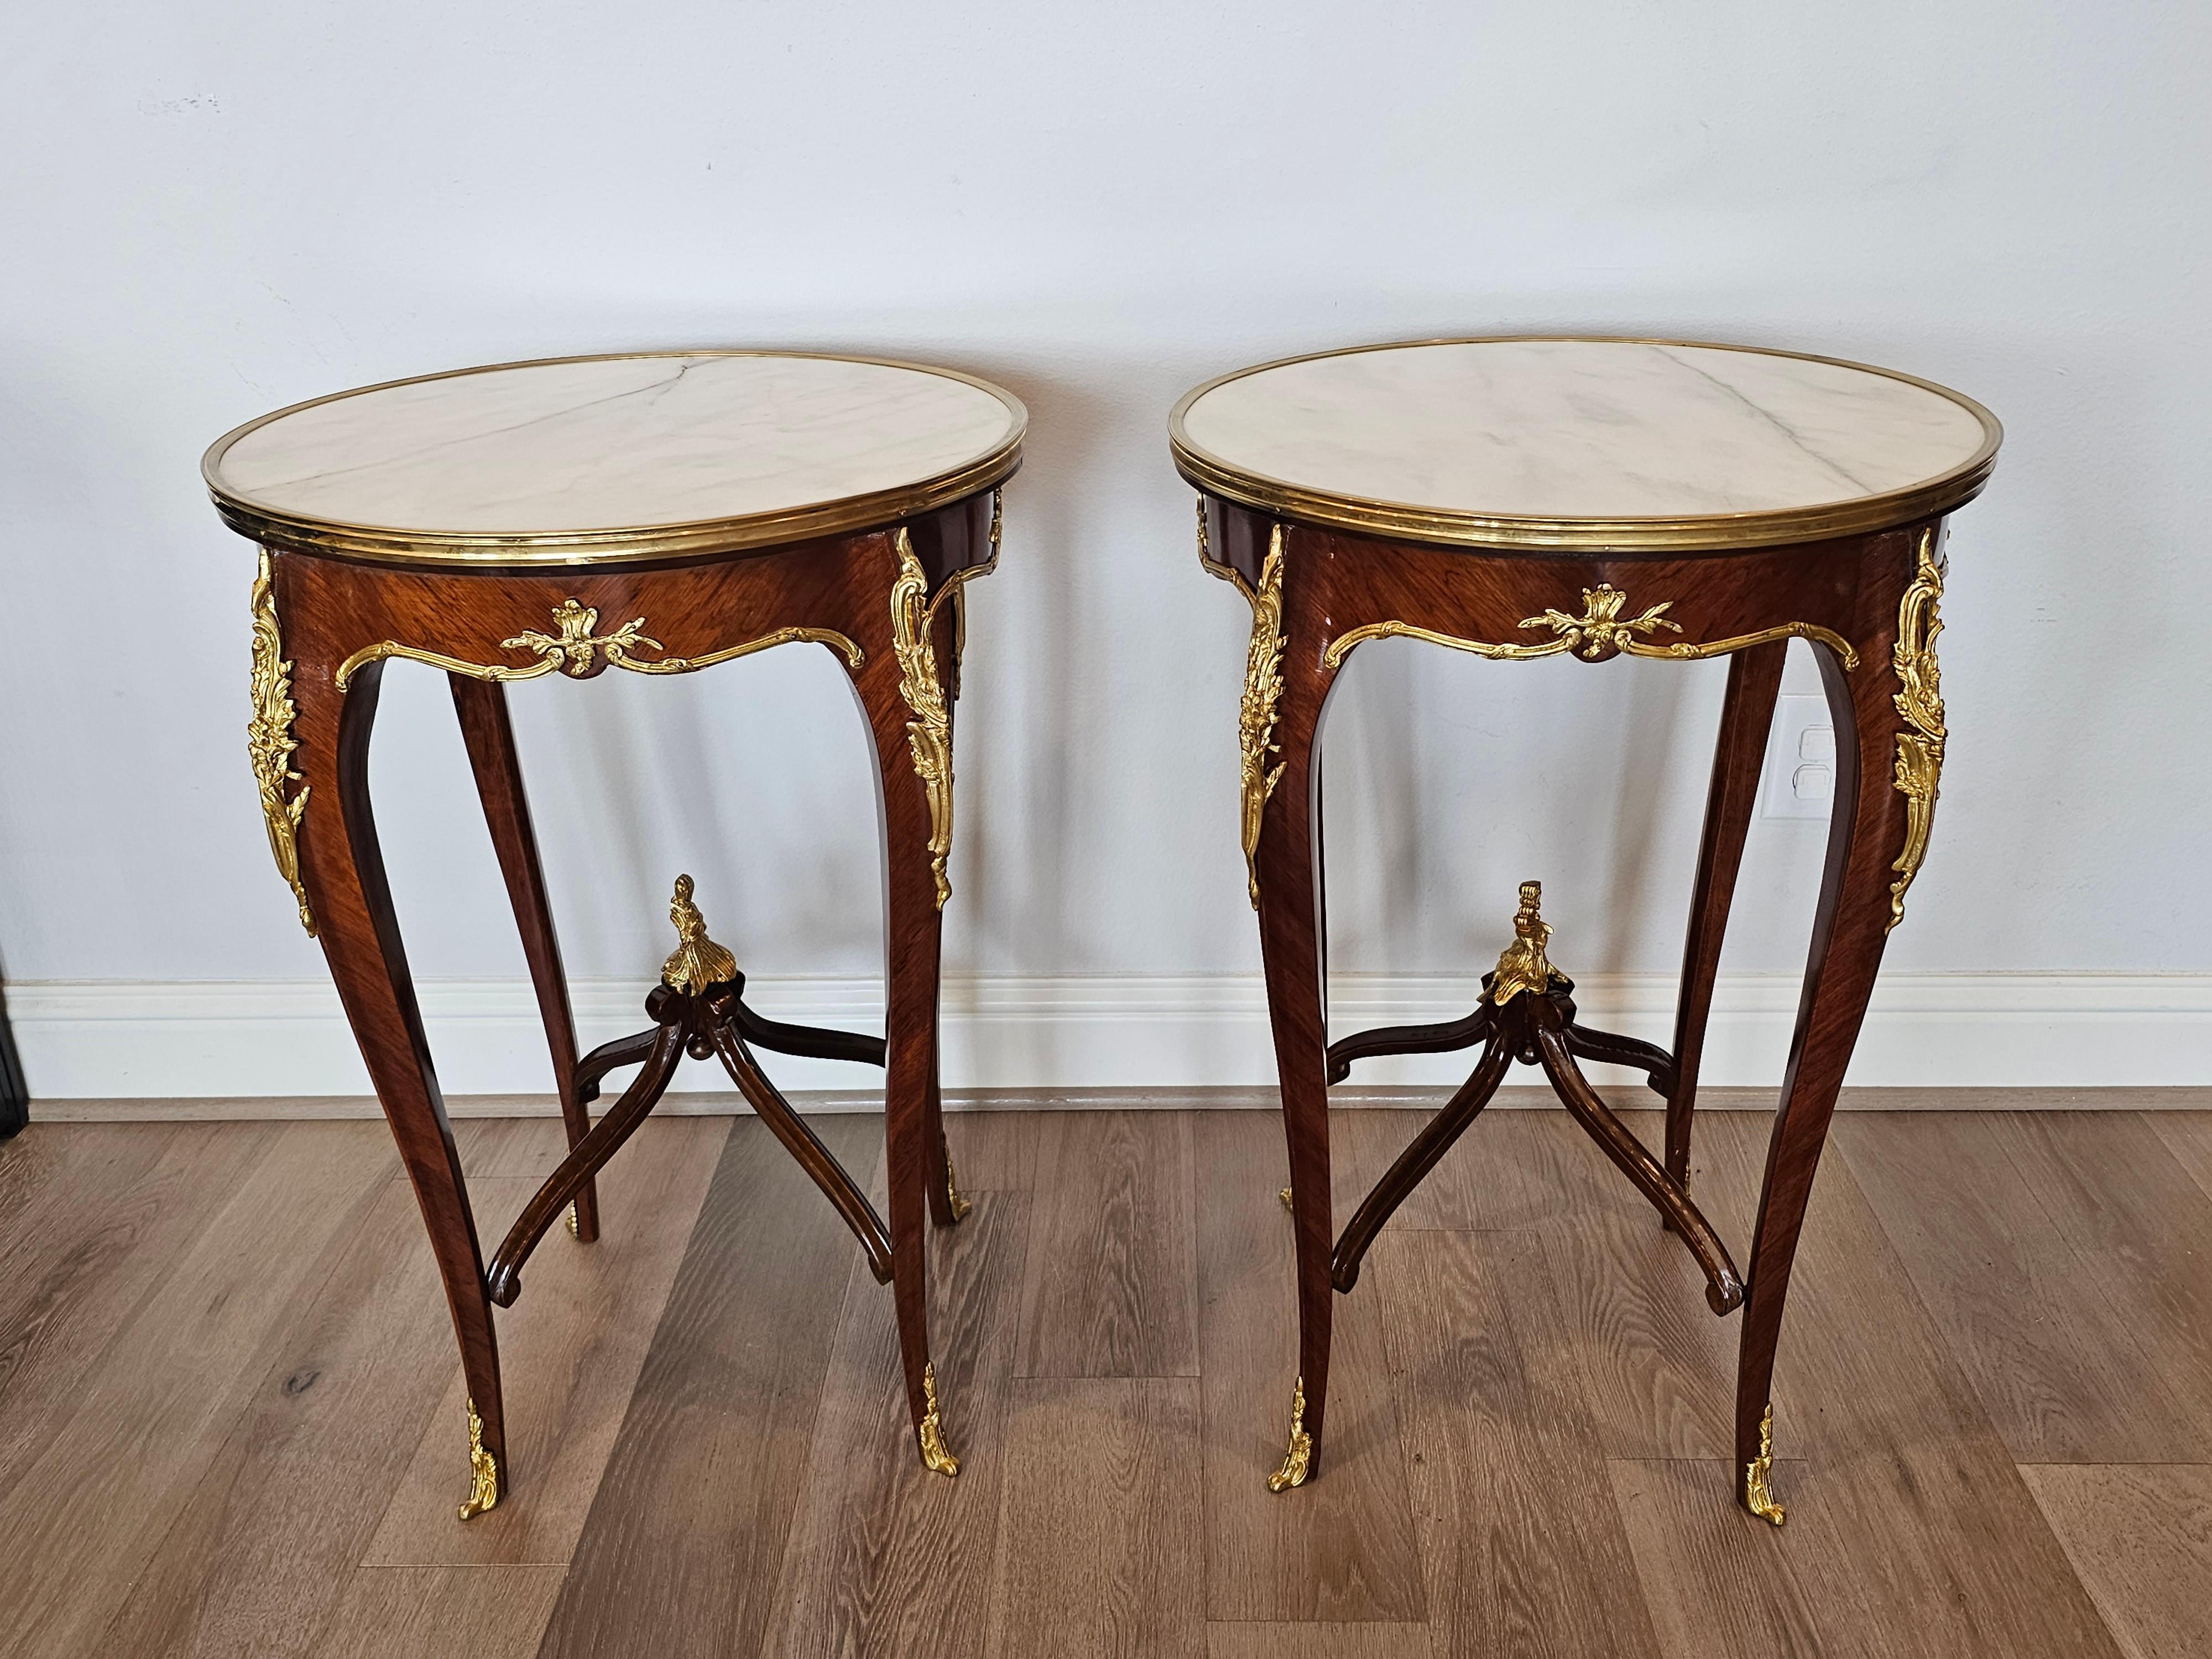 20th Century Pair of French Louis XV Style Gilt Bronze Mounted Kingwood Side Tables For Sale